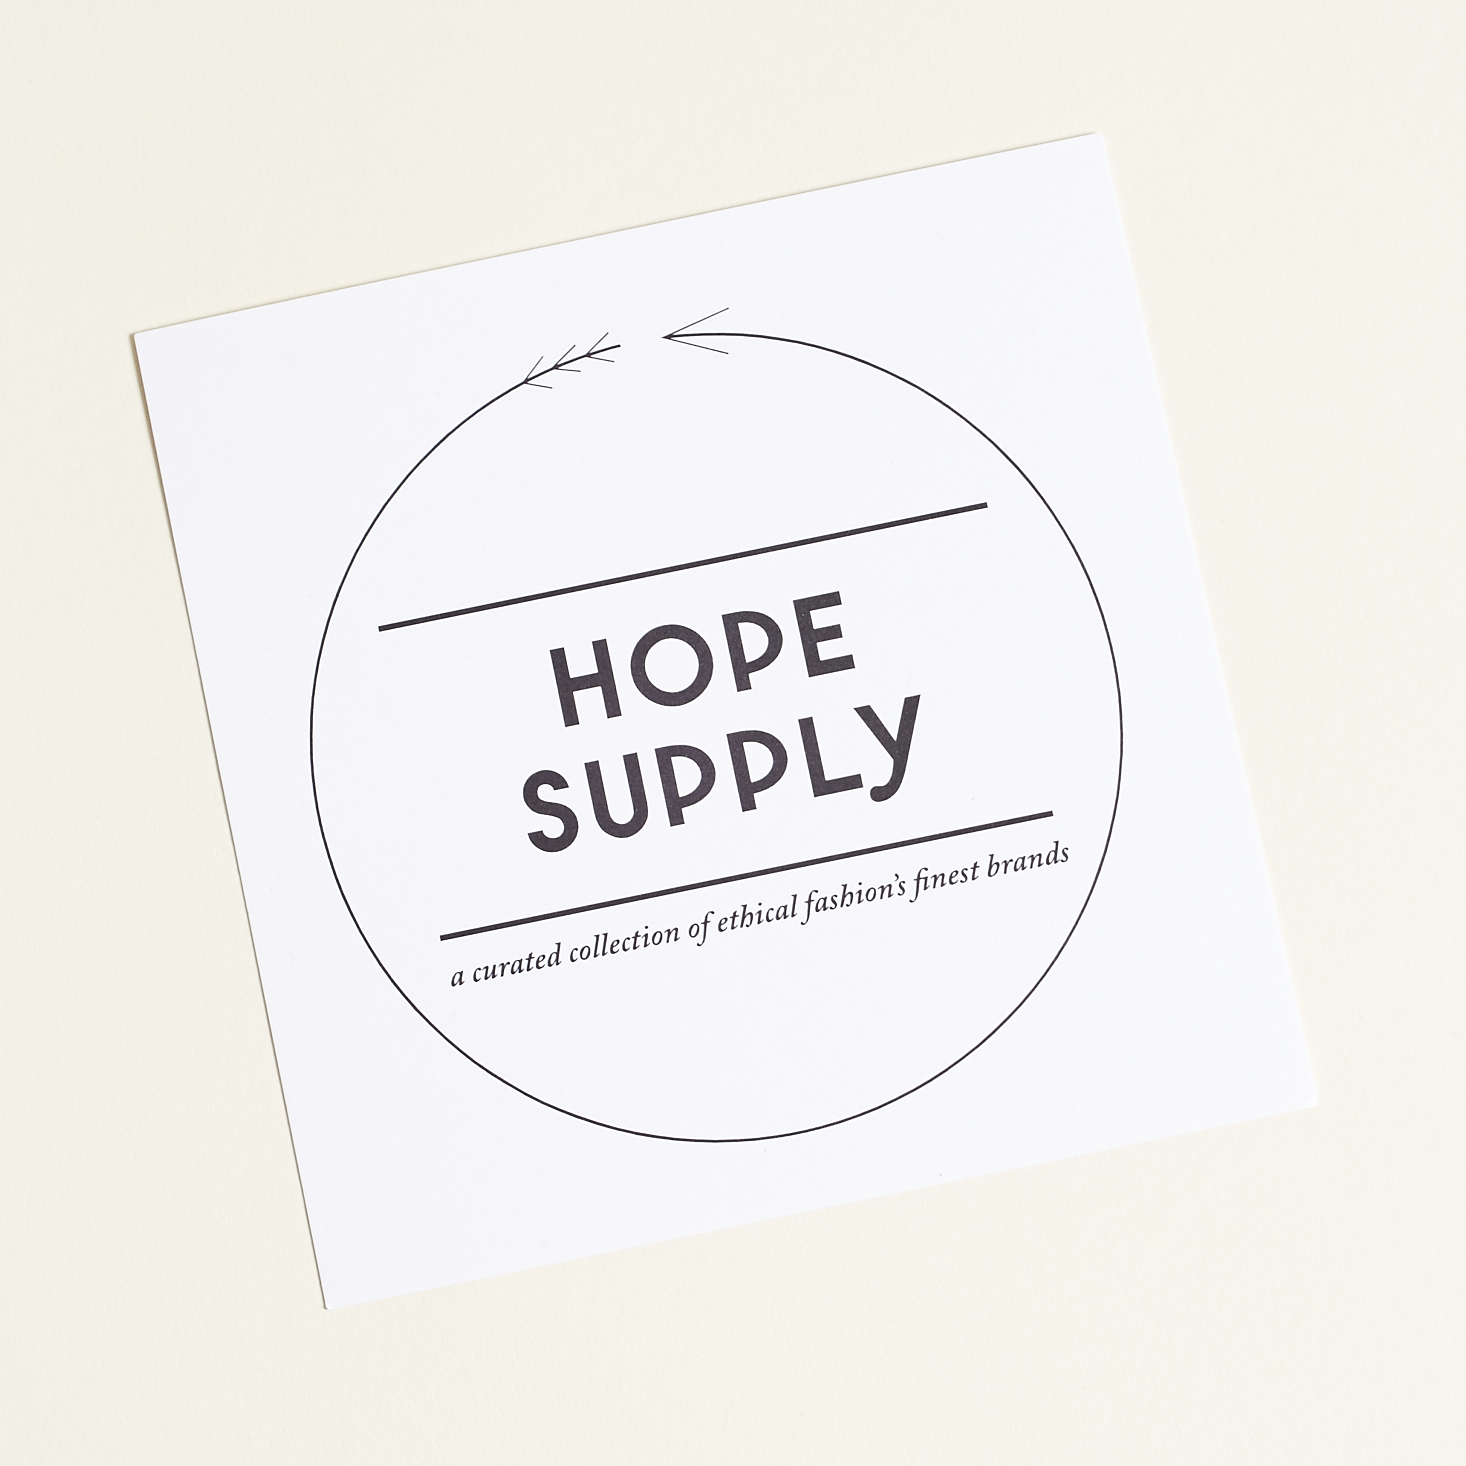 Read our review of the ethical fashion inside the November 2016 Hope Supply box!